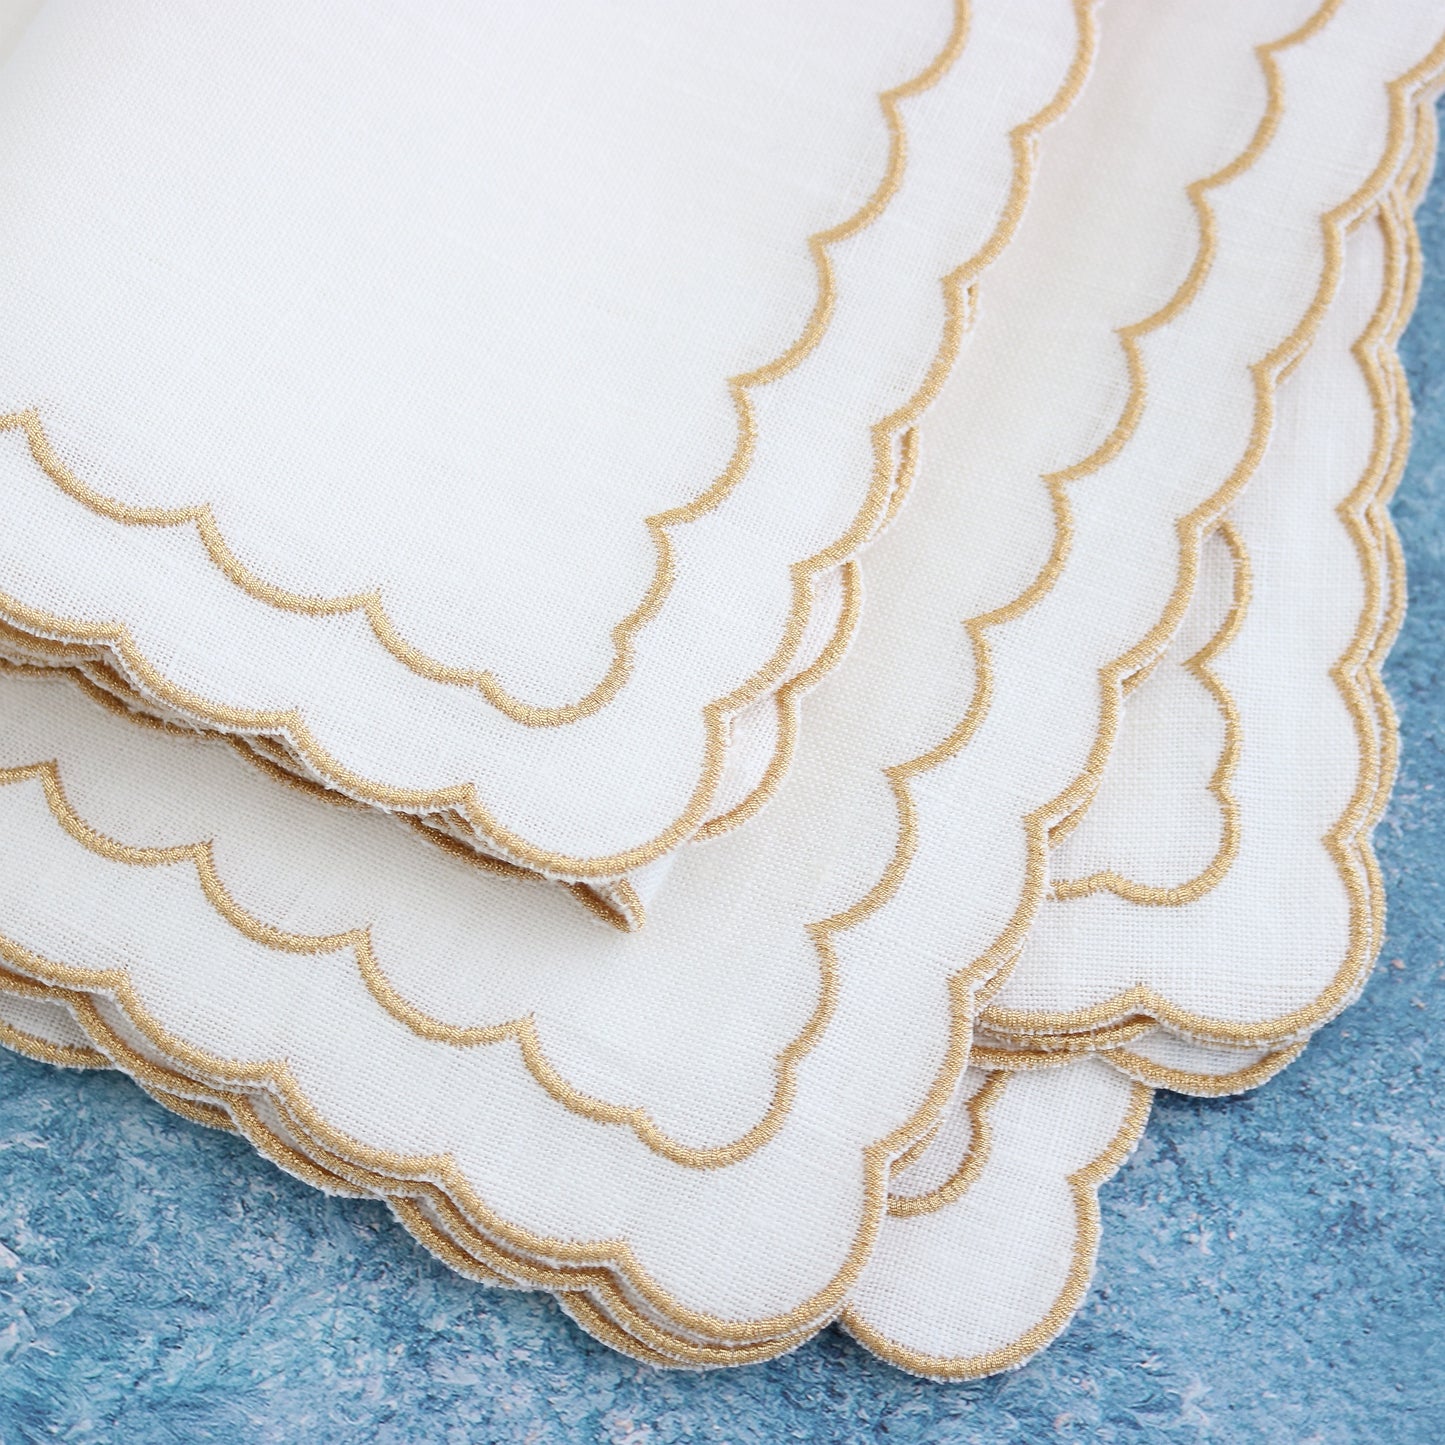 cloese-up of white napkins with gold metallic scallops